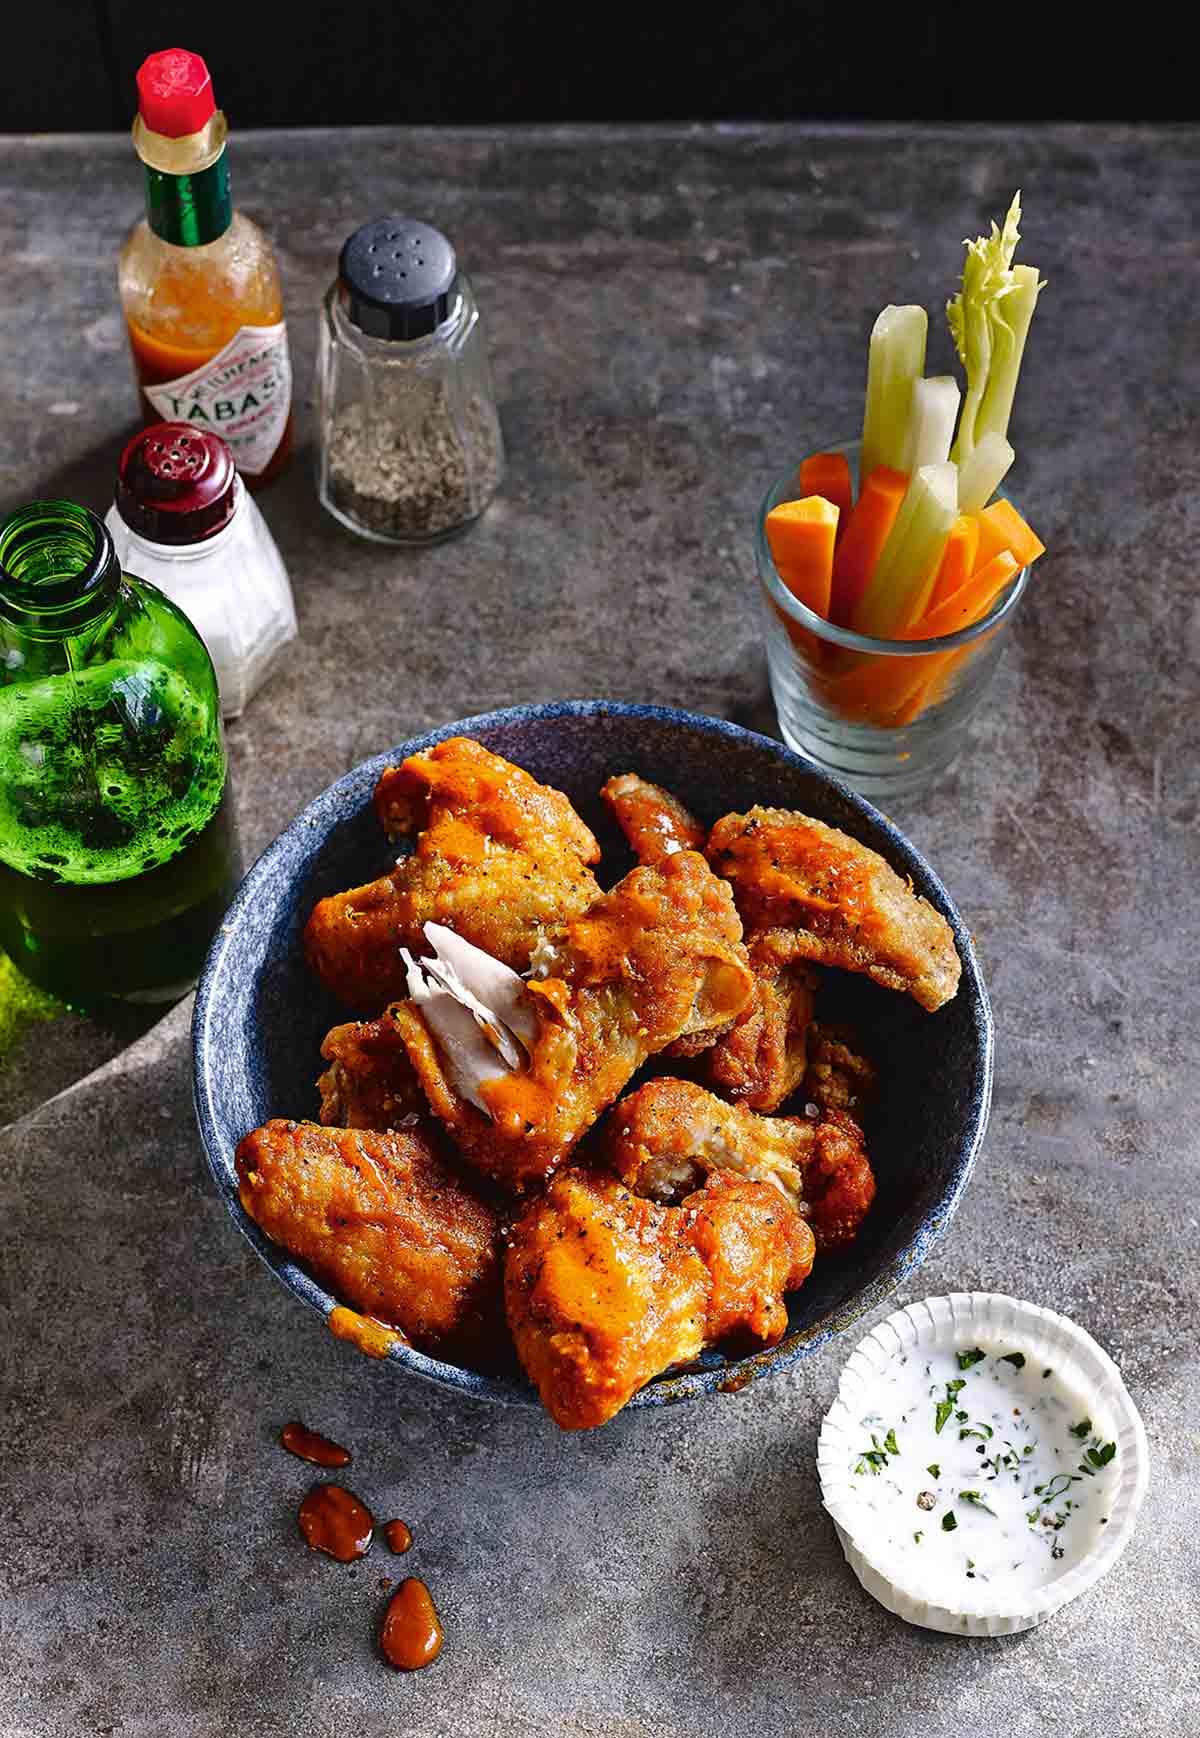 A bowls filled with buffalo chicken wings with a dish of ranch dip, a bottle of beer, and a glass of cut raw vegetables on the side.